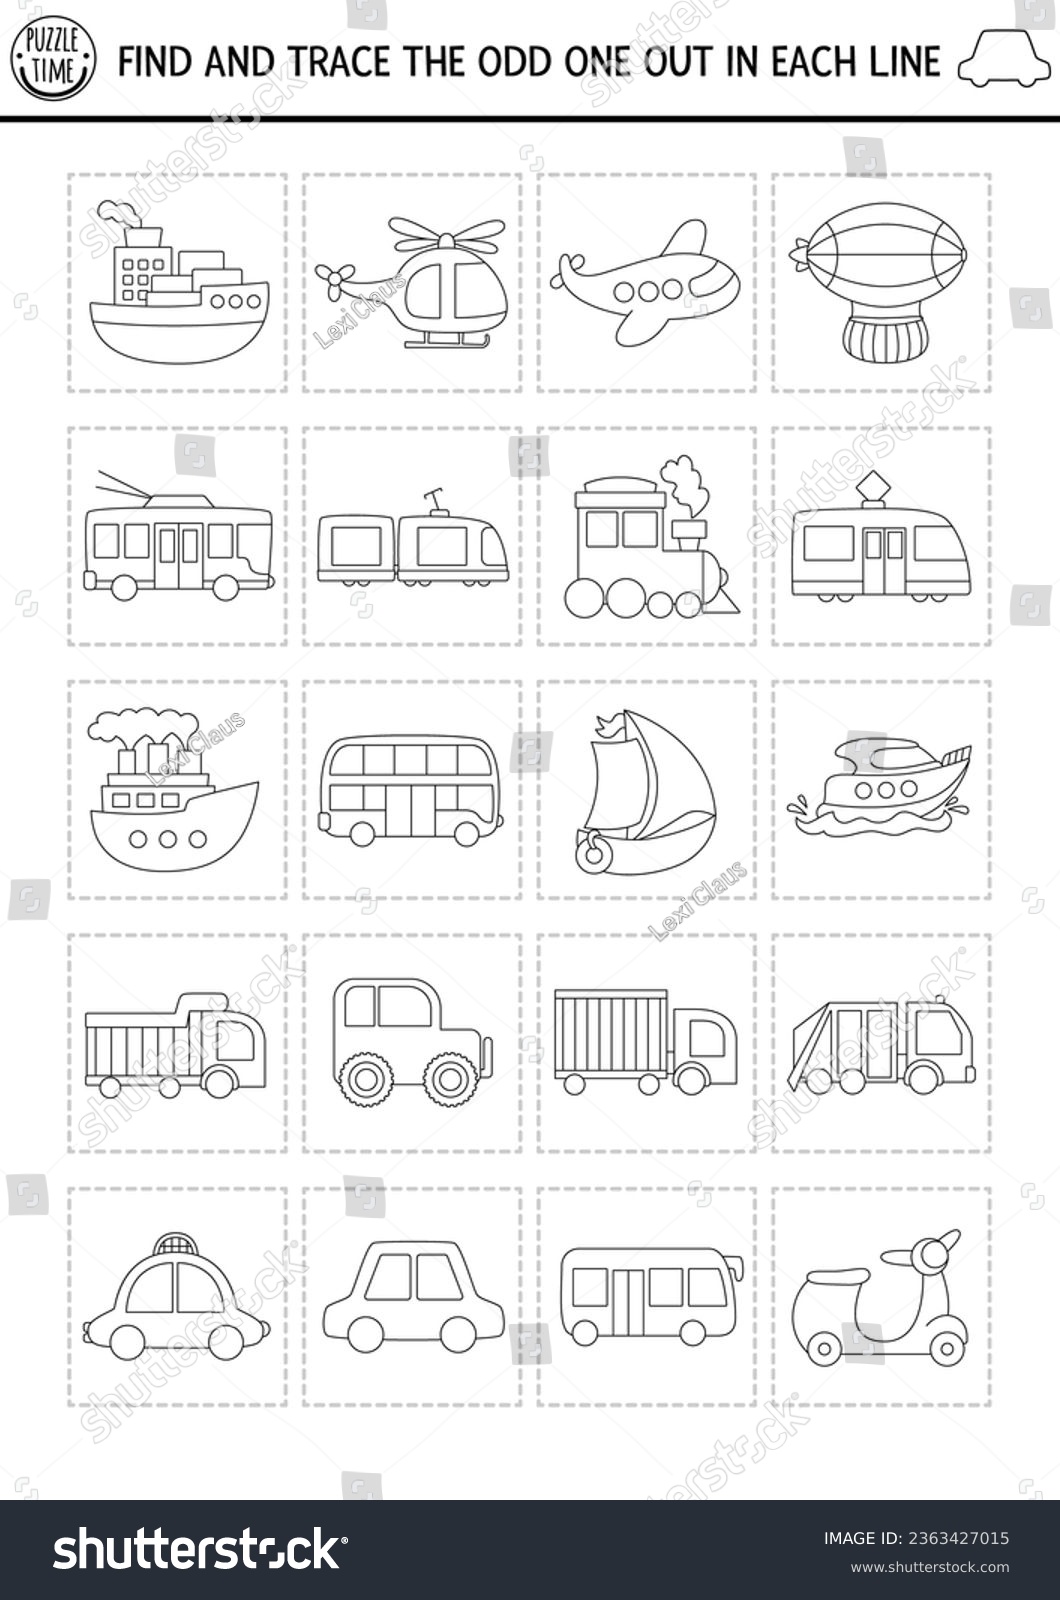 Find the odd one out. Transportation black and white logical activity for kids. Water, air, land, public transport educational quiz worksheet, coloring page. Printable game with car, bus, train, tram #2363427015